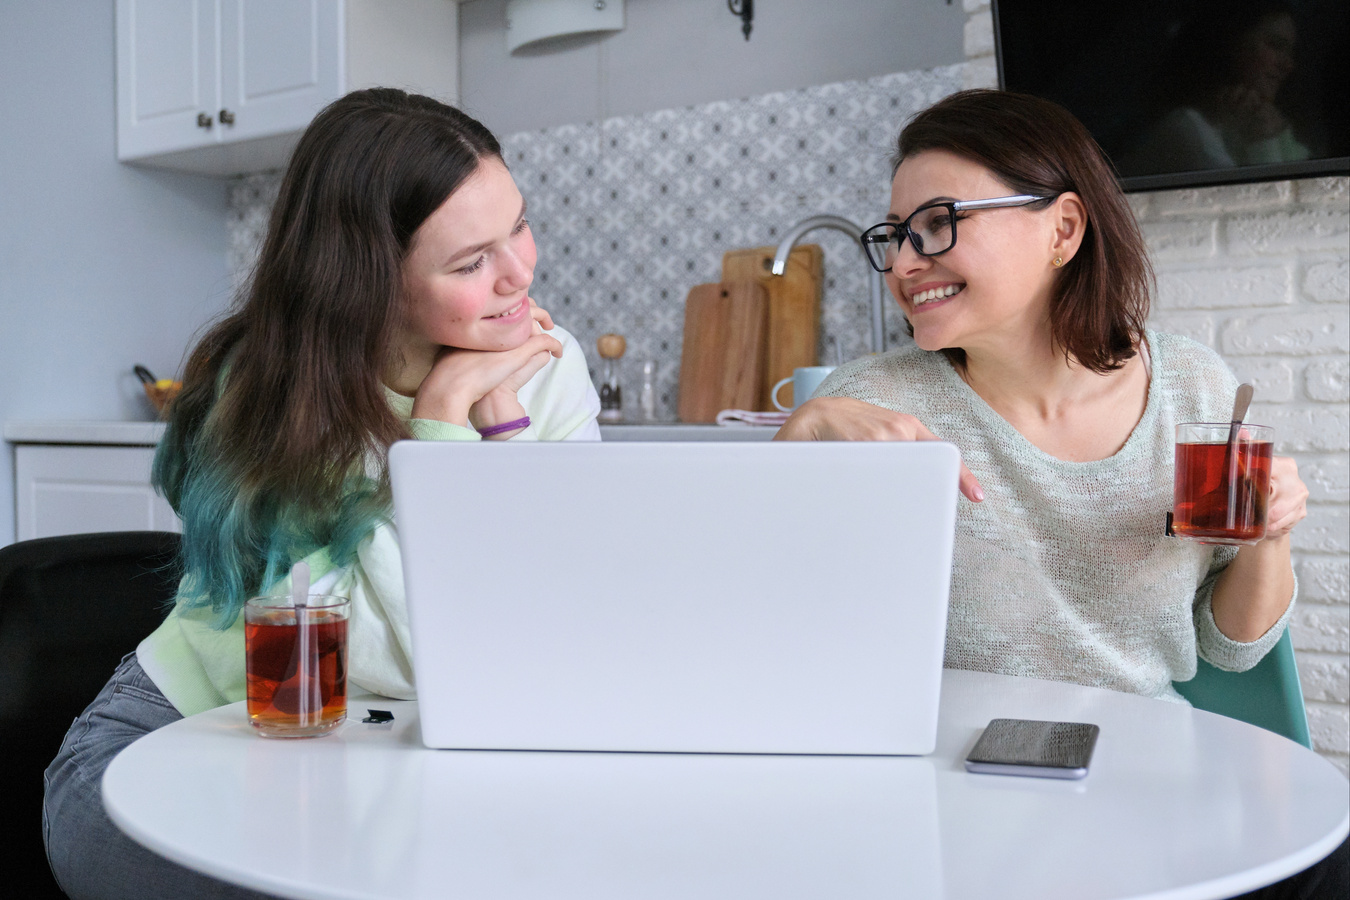 Parent and Teenager Sitting at Home in Kitchen and Looking at Laptop Screen